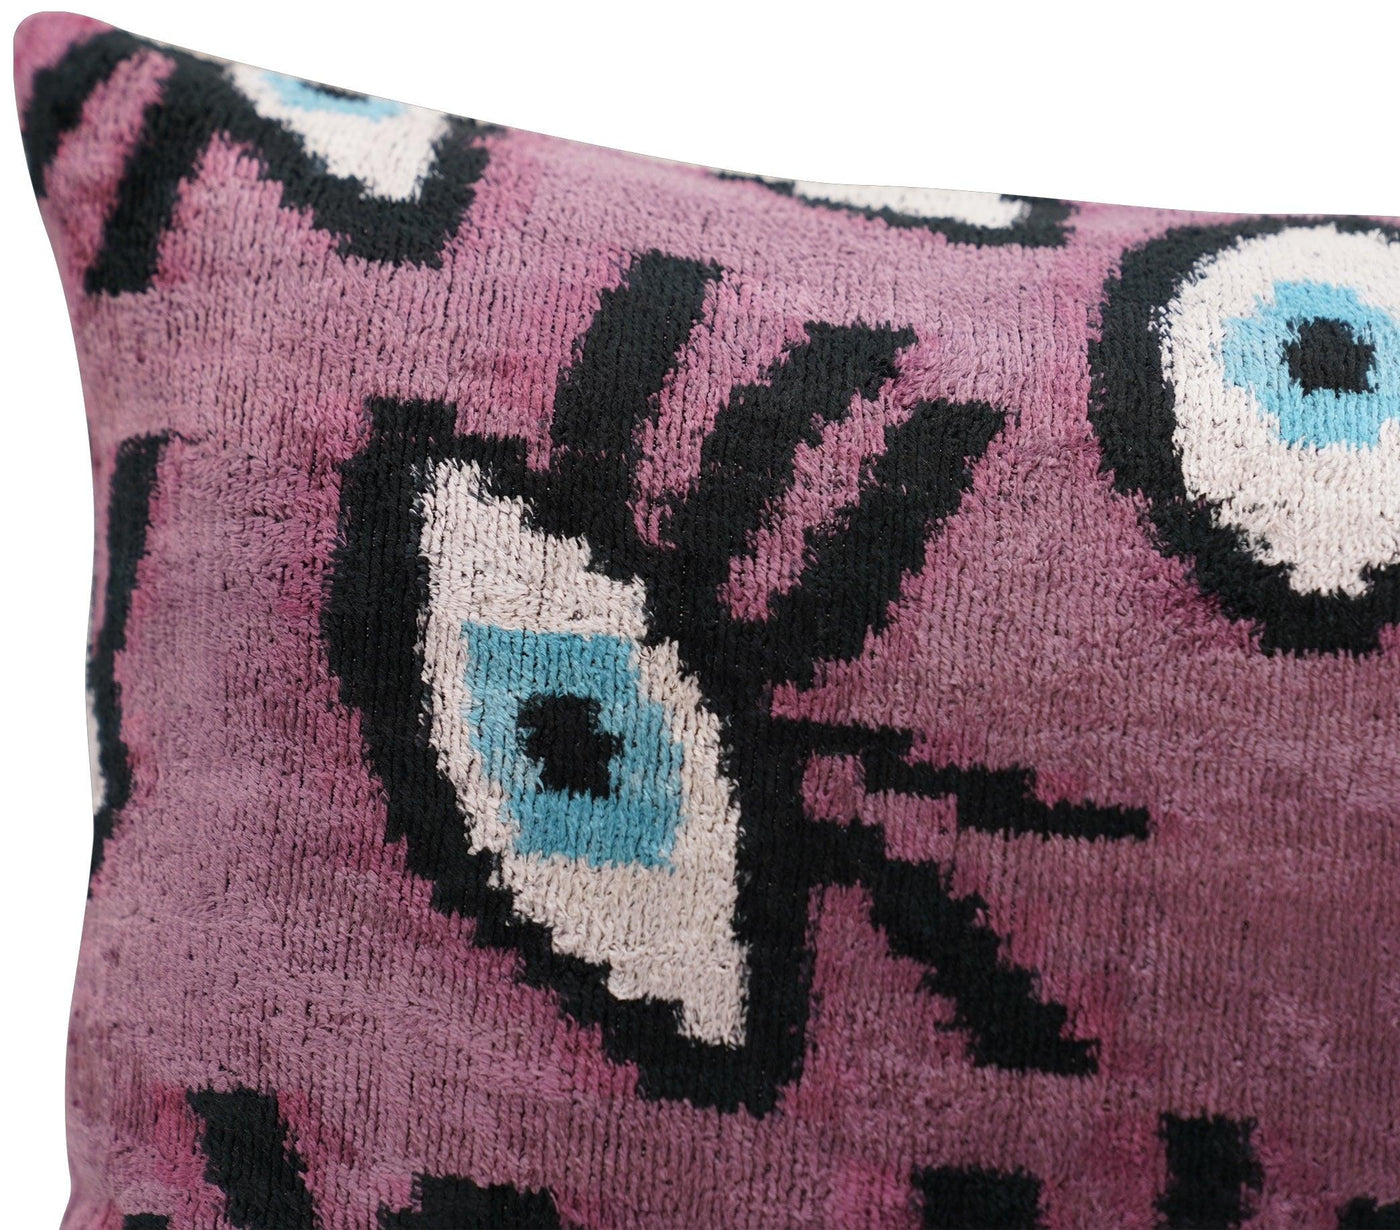 Canvello Luxury Pink Purple Evil Eye Pillow for Couch | 16 x 24 in (40 x 60 cm)